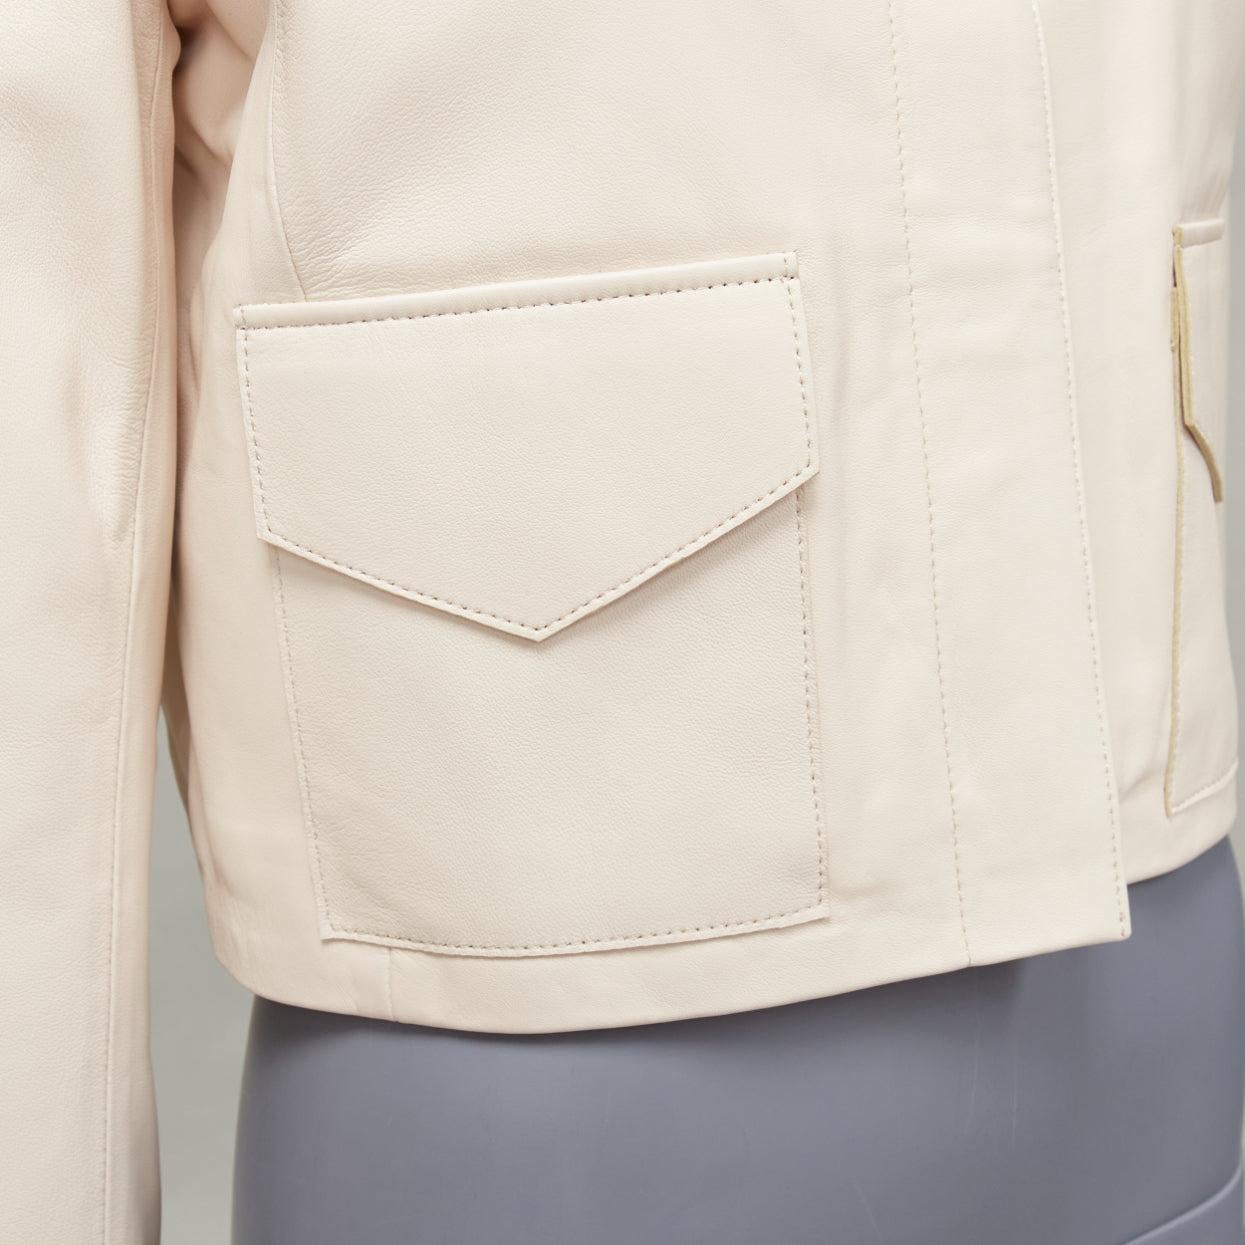 NOUR HAMMOUR cream lambskin minimal dual pocket cropped zip jacket IT36 XXS
Reference: LNKO/A02256
Brand: Nour Hammour
Material: Lambskin Leather
Color: Cream
Pattern: Solid
Closure: Zip
Lining: Silver Fabric
Extra Details: Nour Hammour Lambskin